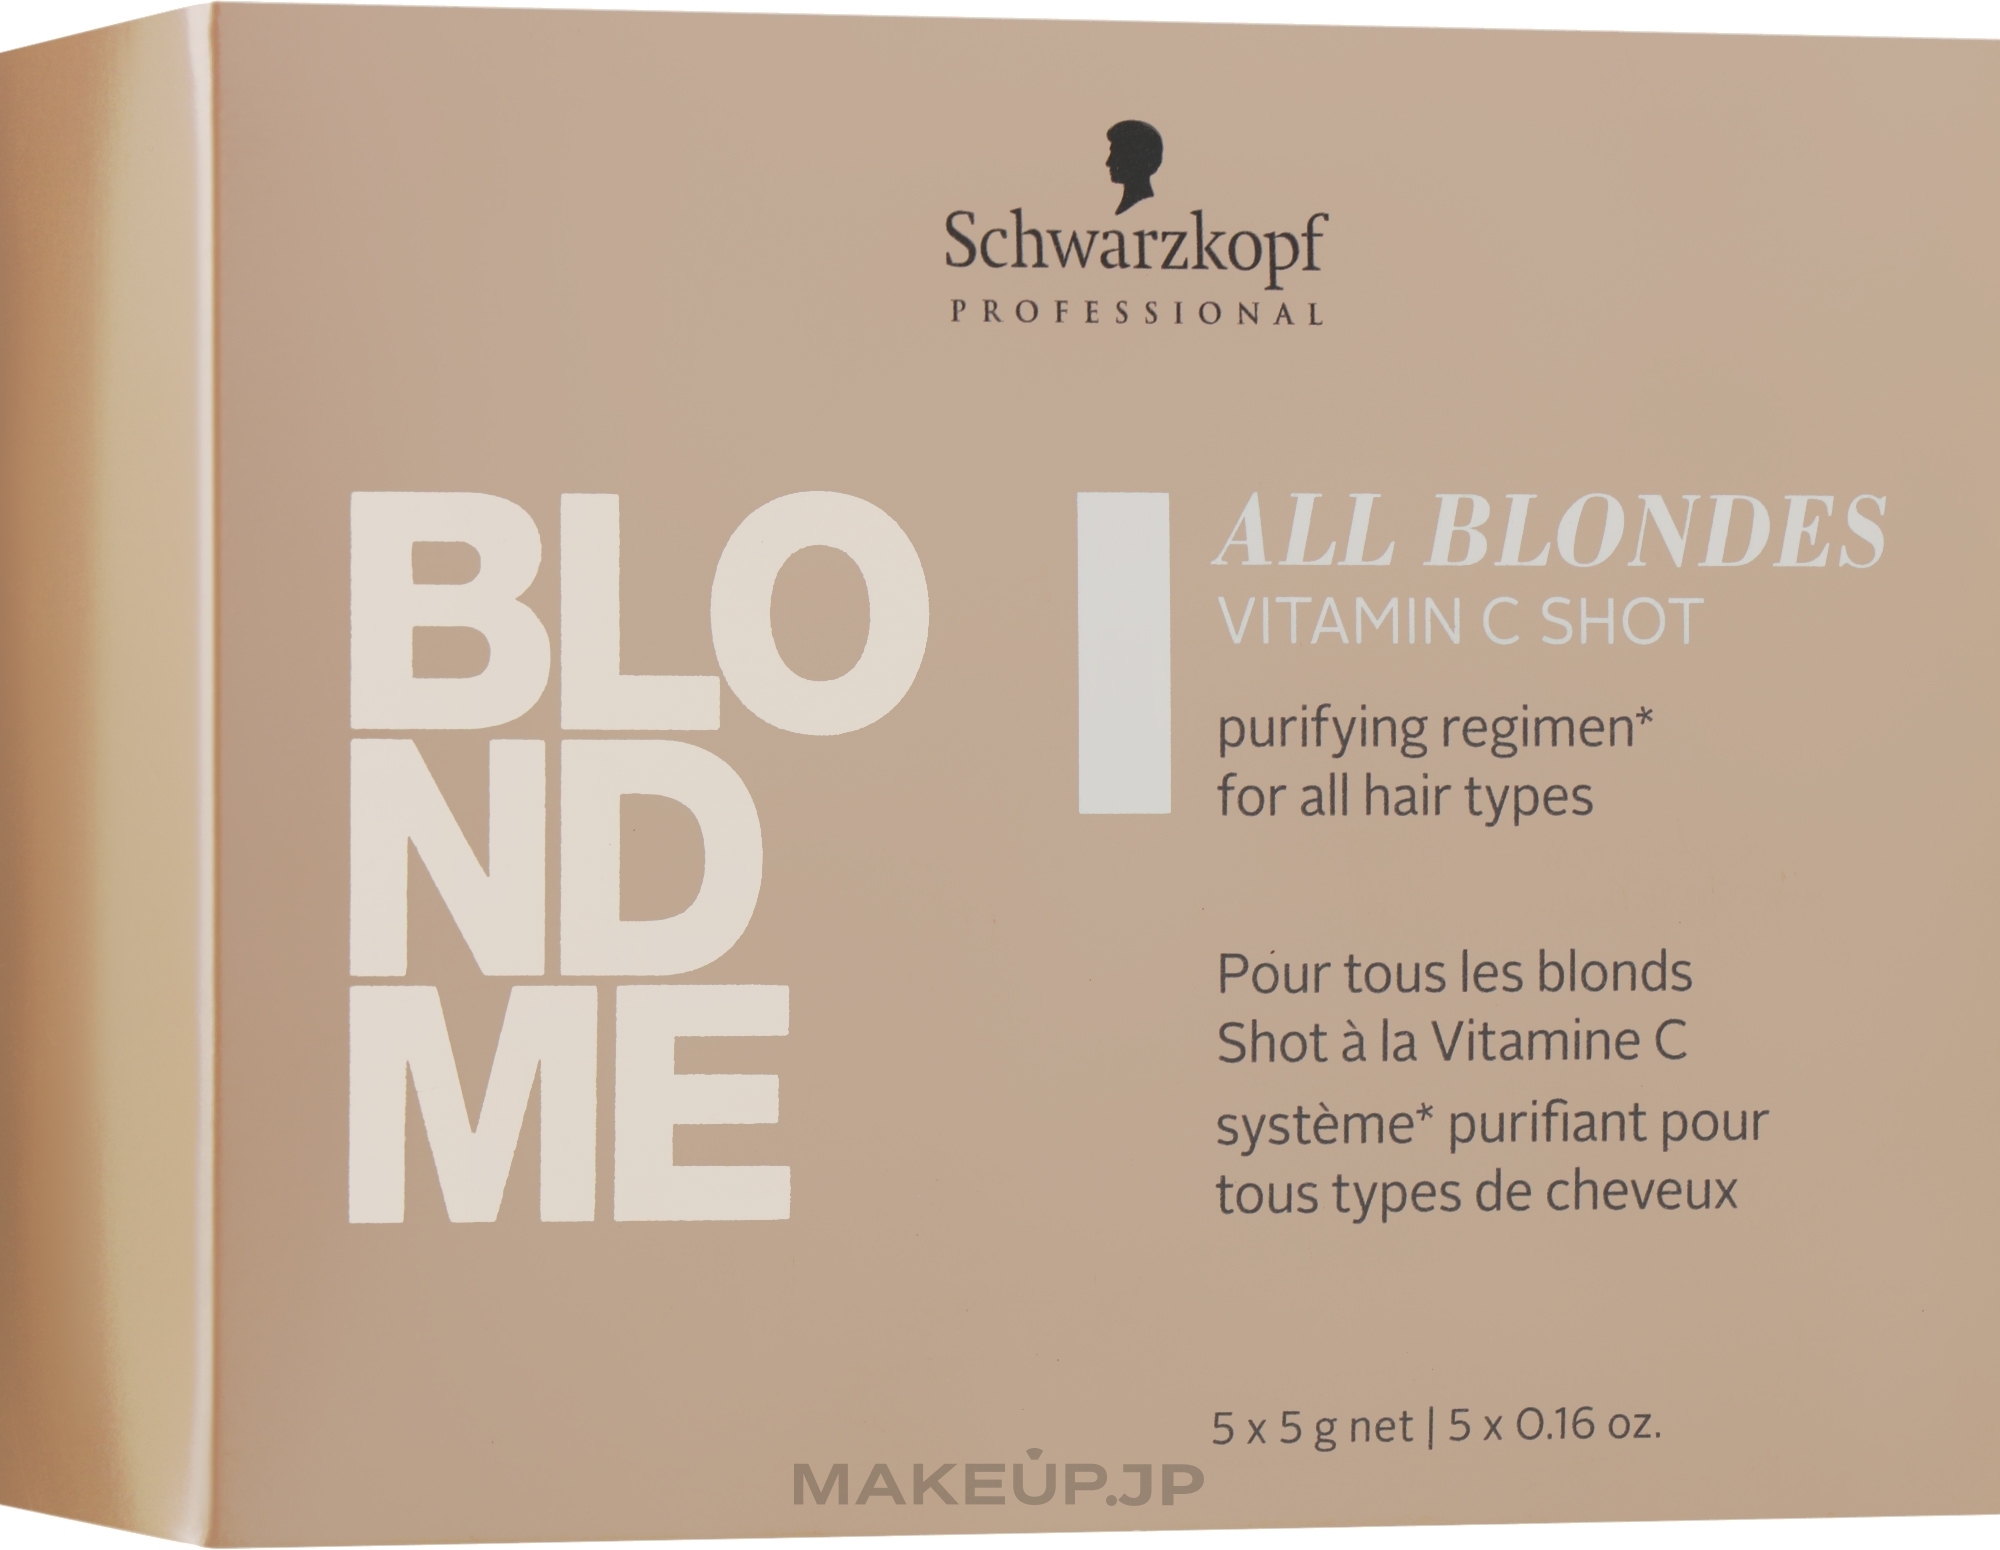 Vitamin C Concentrate for All Hair Types - Schwarzkopf Professional Blondme All Blondes Vitamin C Shot — photo 5 x 5 g